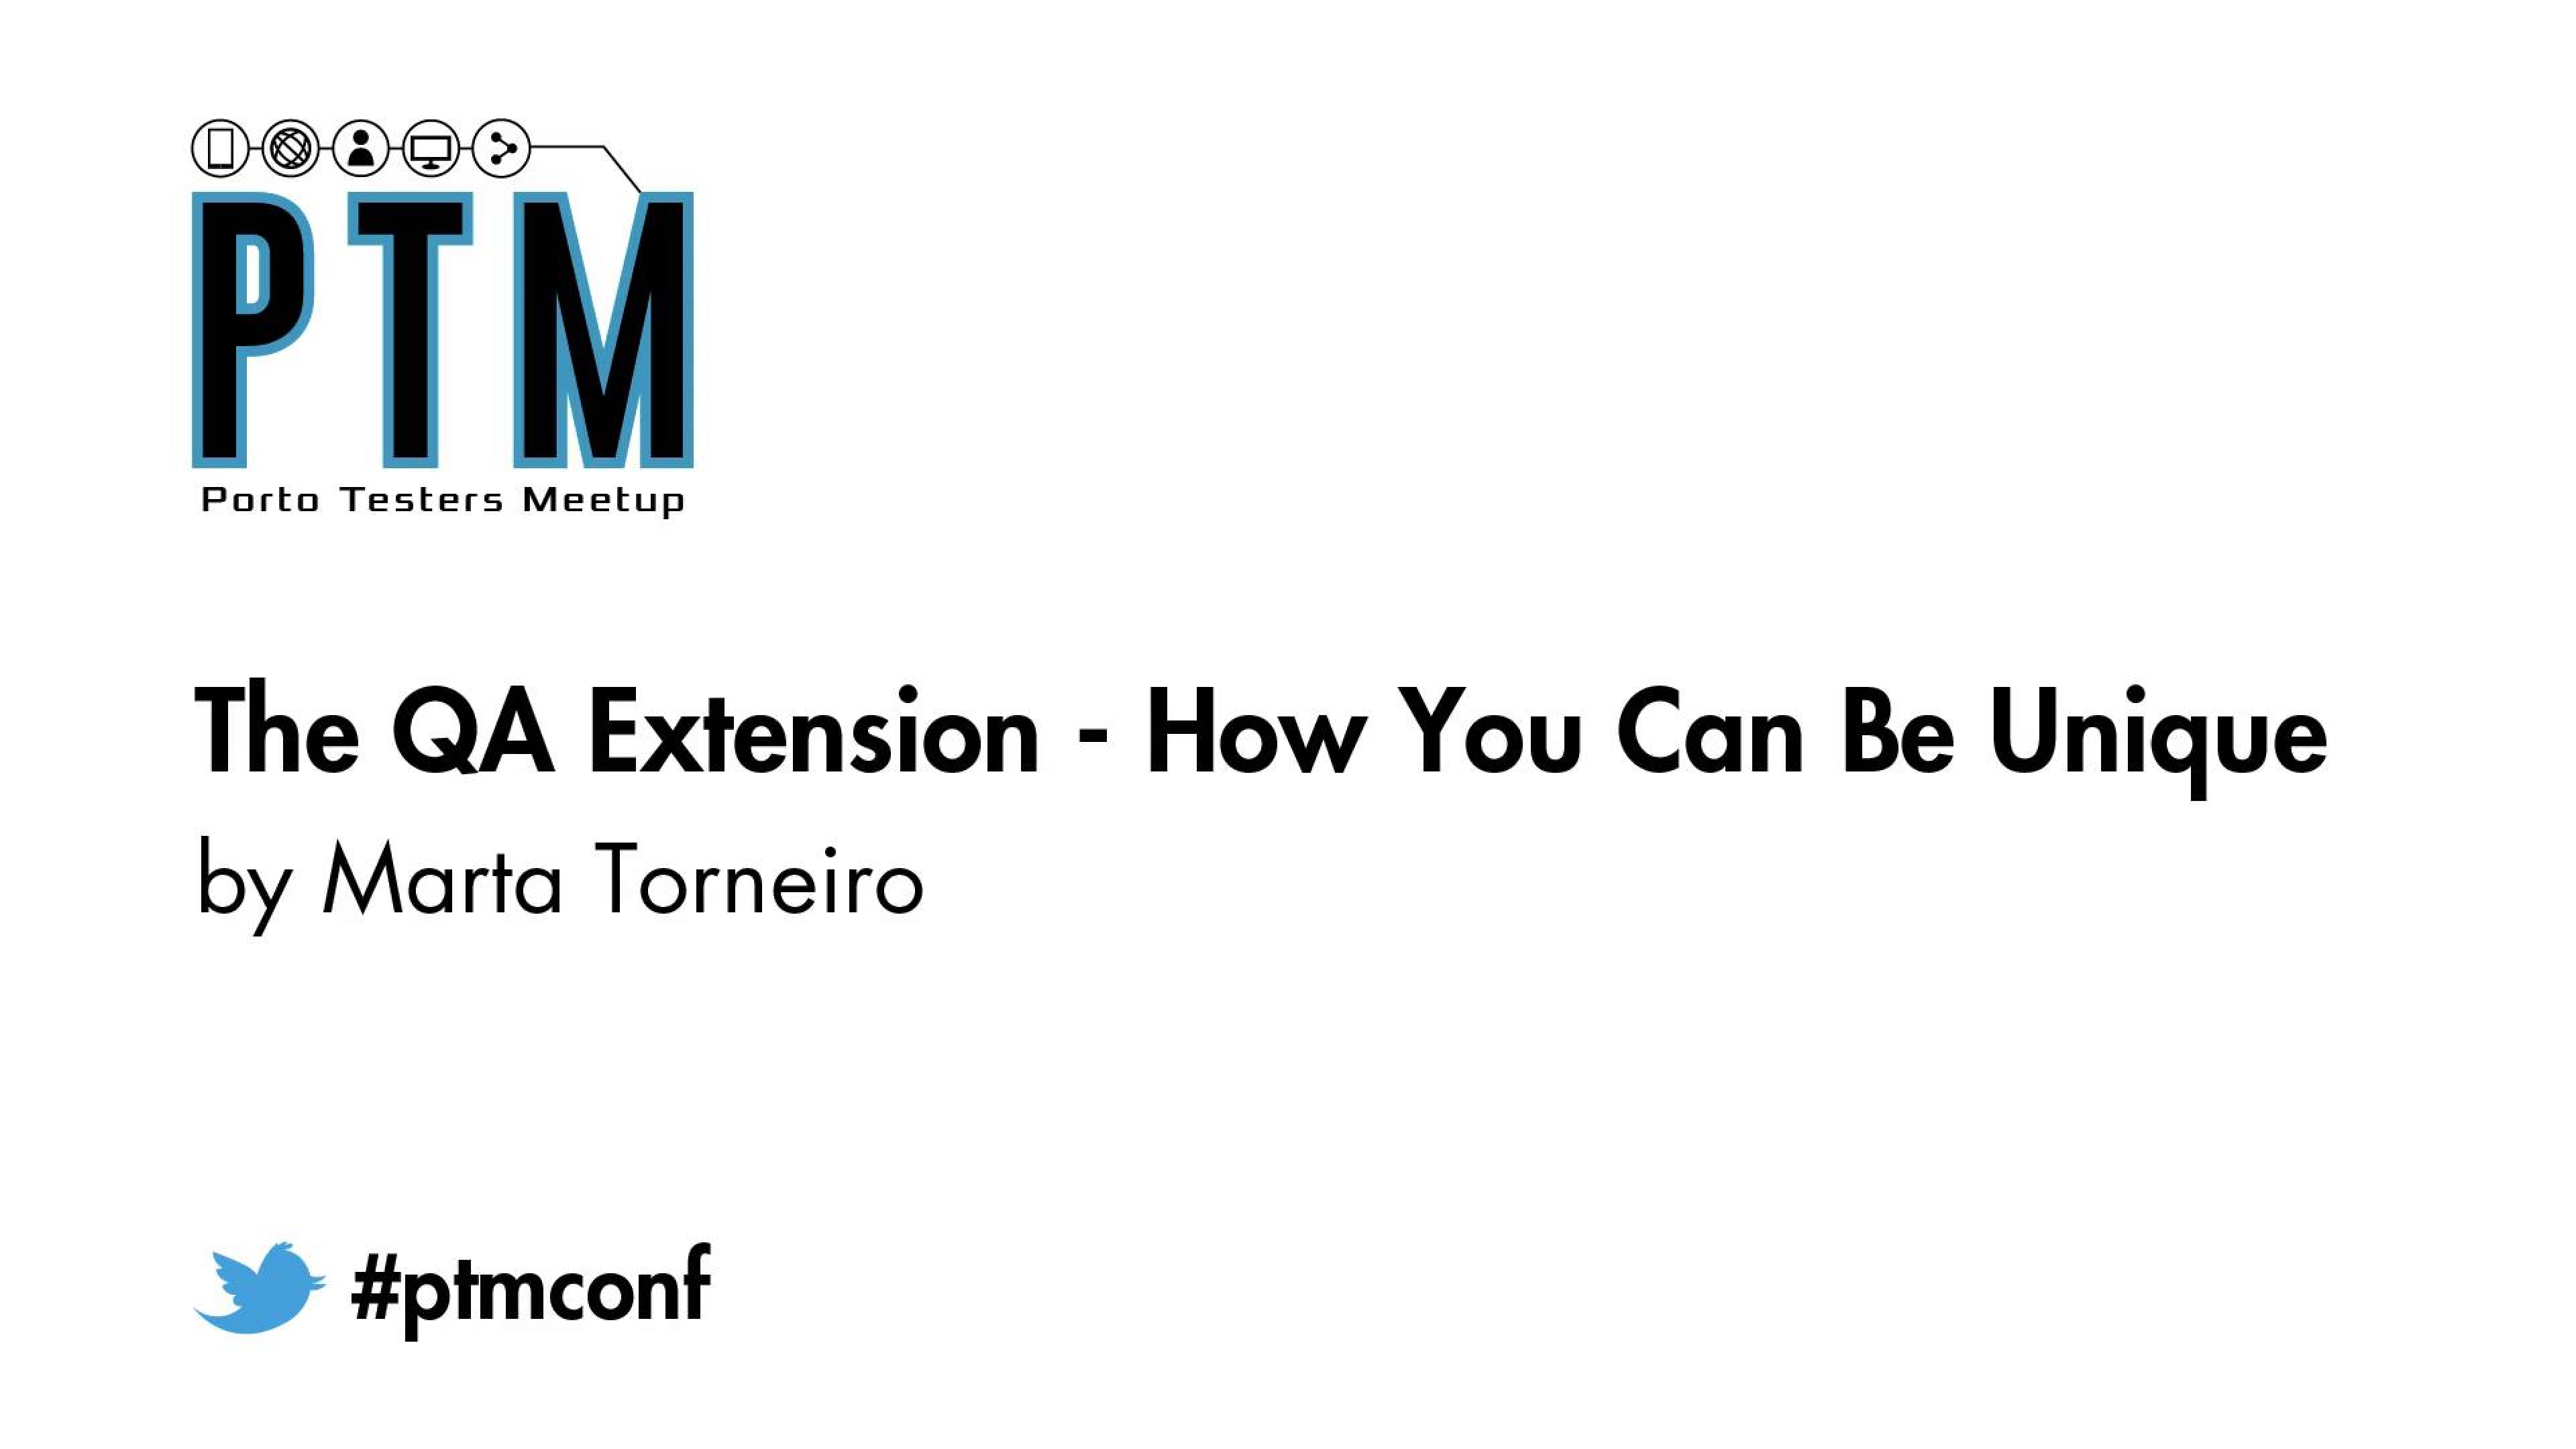 The QA Extension: How You Can Be Unique! - Marta Torneiro